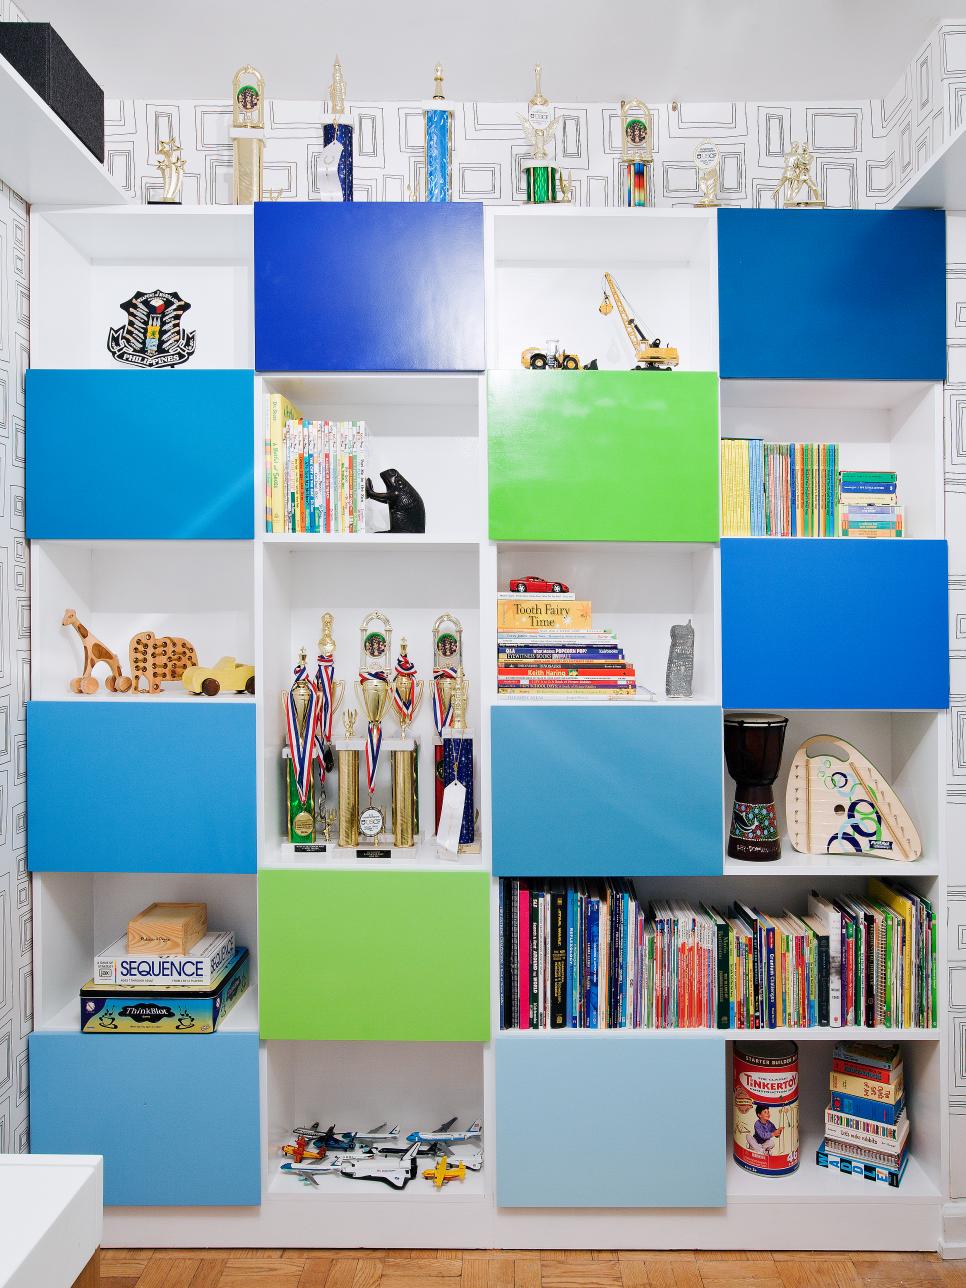 Bookshelf with Blue and Green Panels